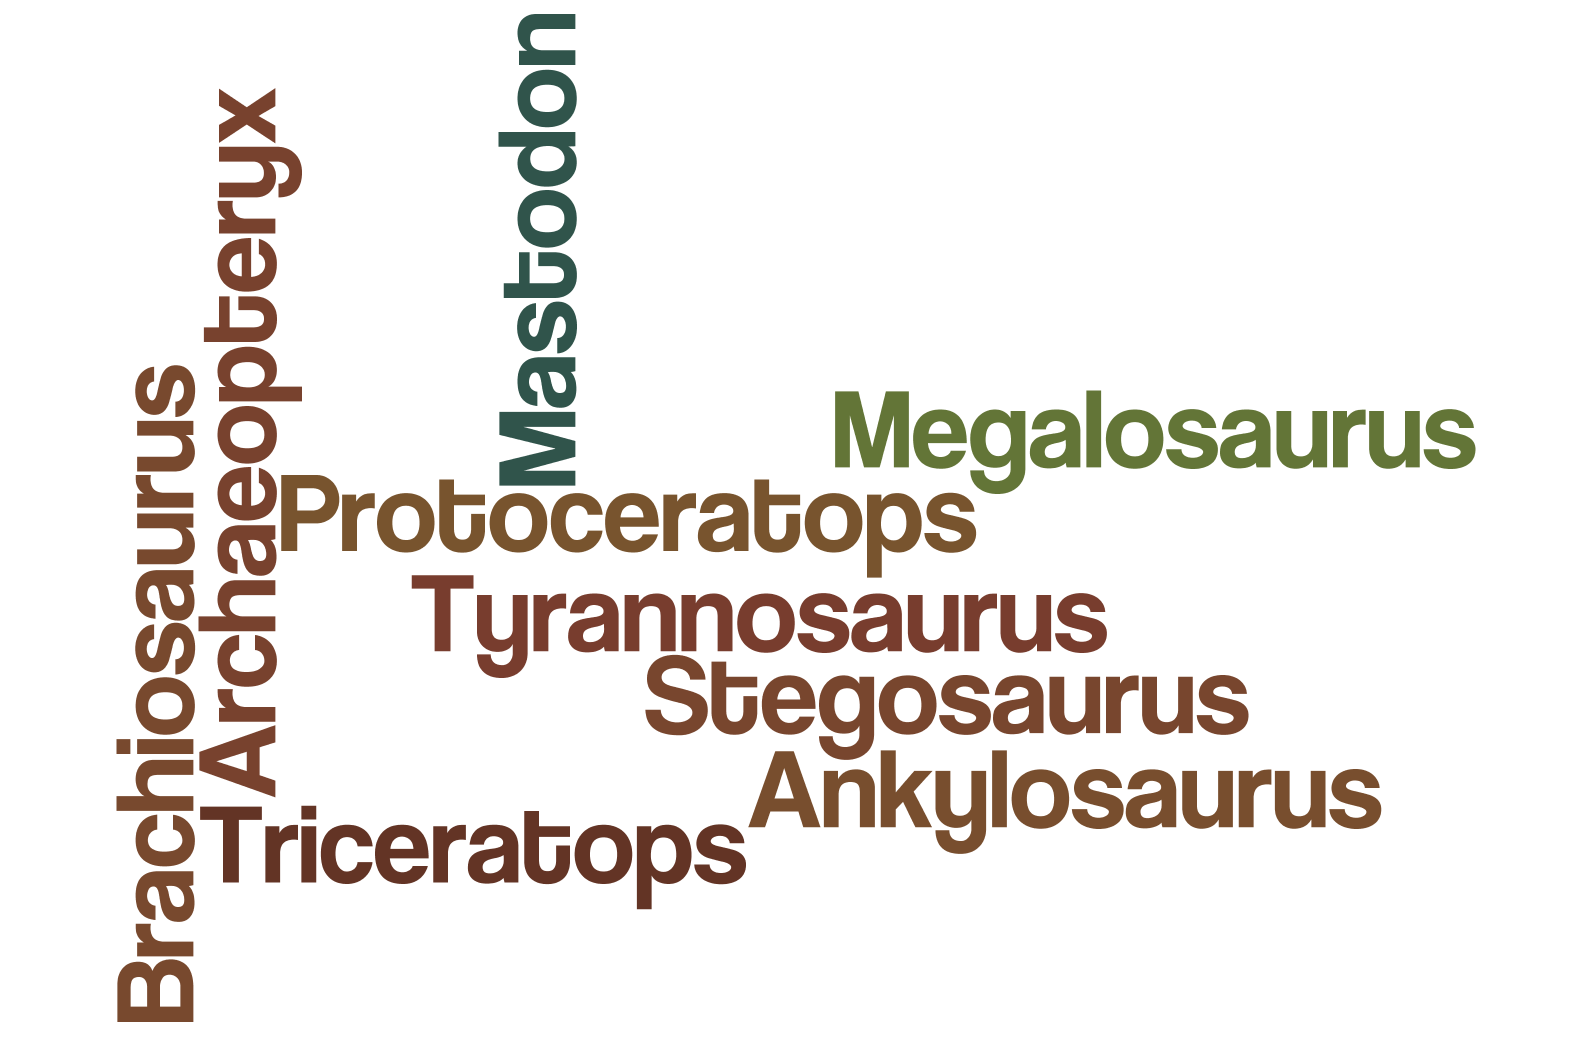 img/word_cloud_questions_3/dinosaurs_2.png